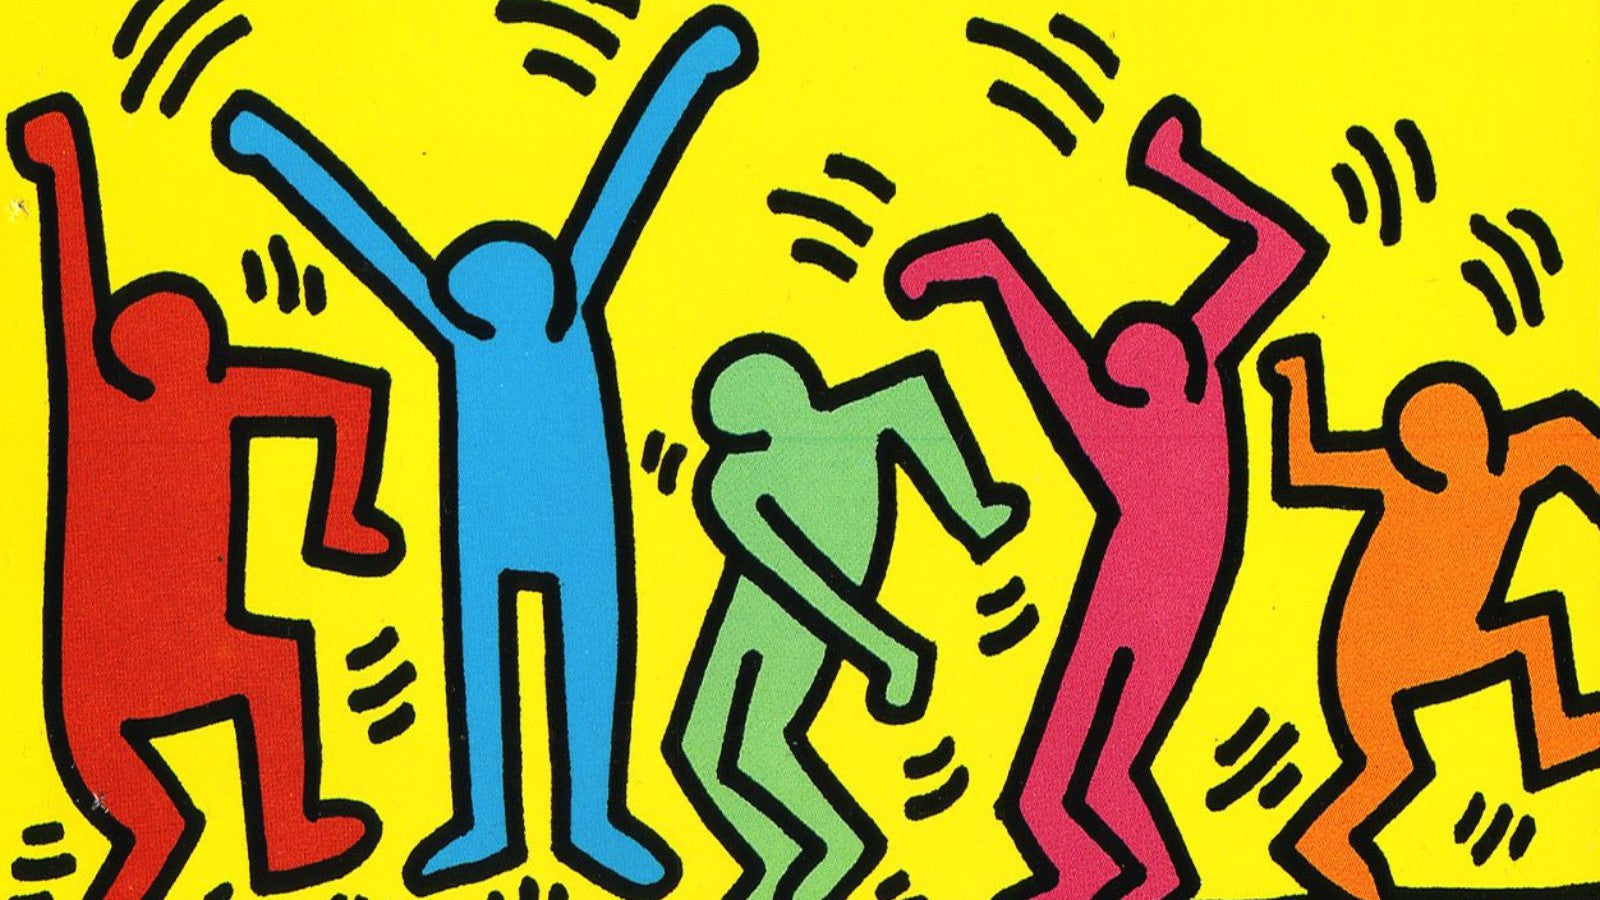 Untitled (Dance) painting by Keith Haring (1987)